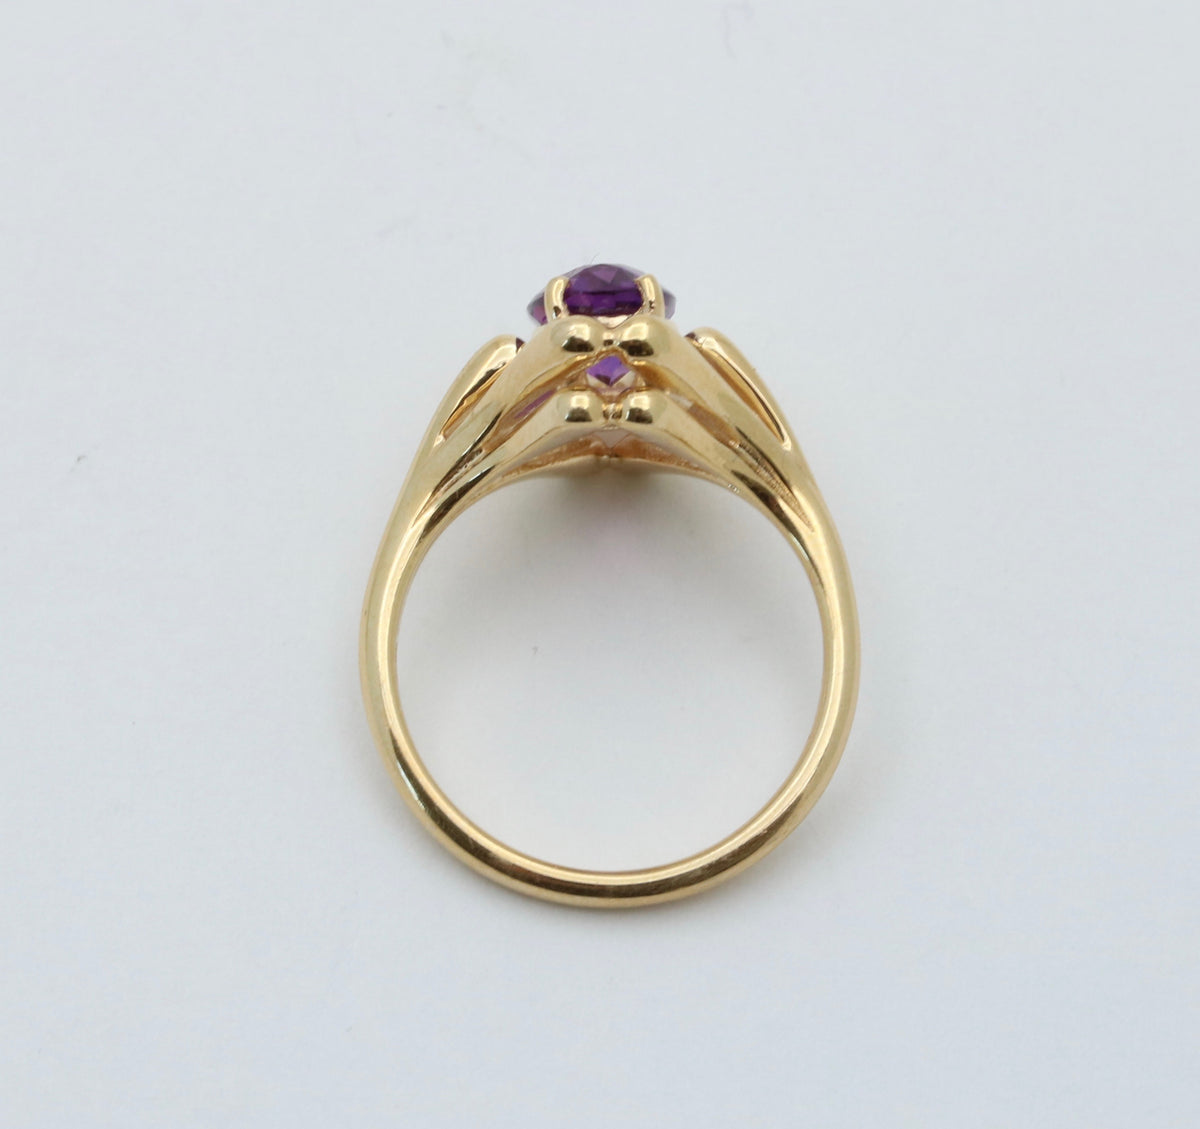 Vintage Oval Cut Amethyst and 14K Gold Ring